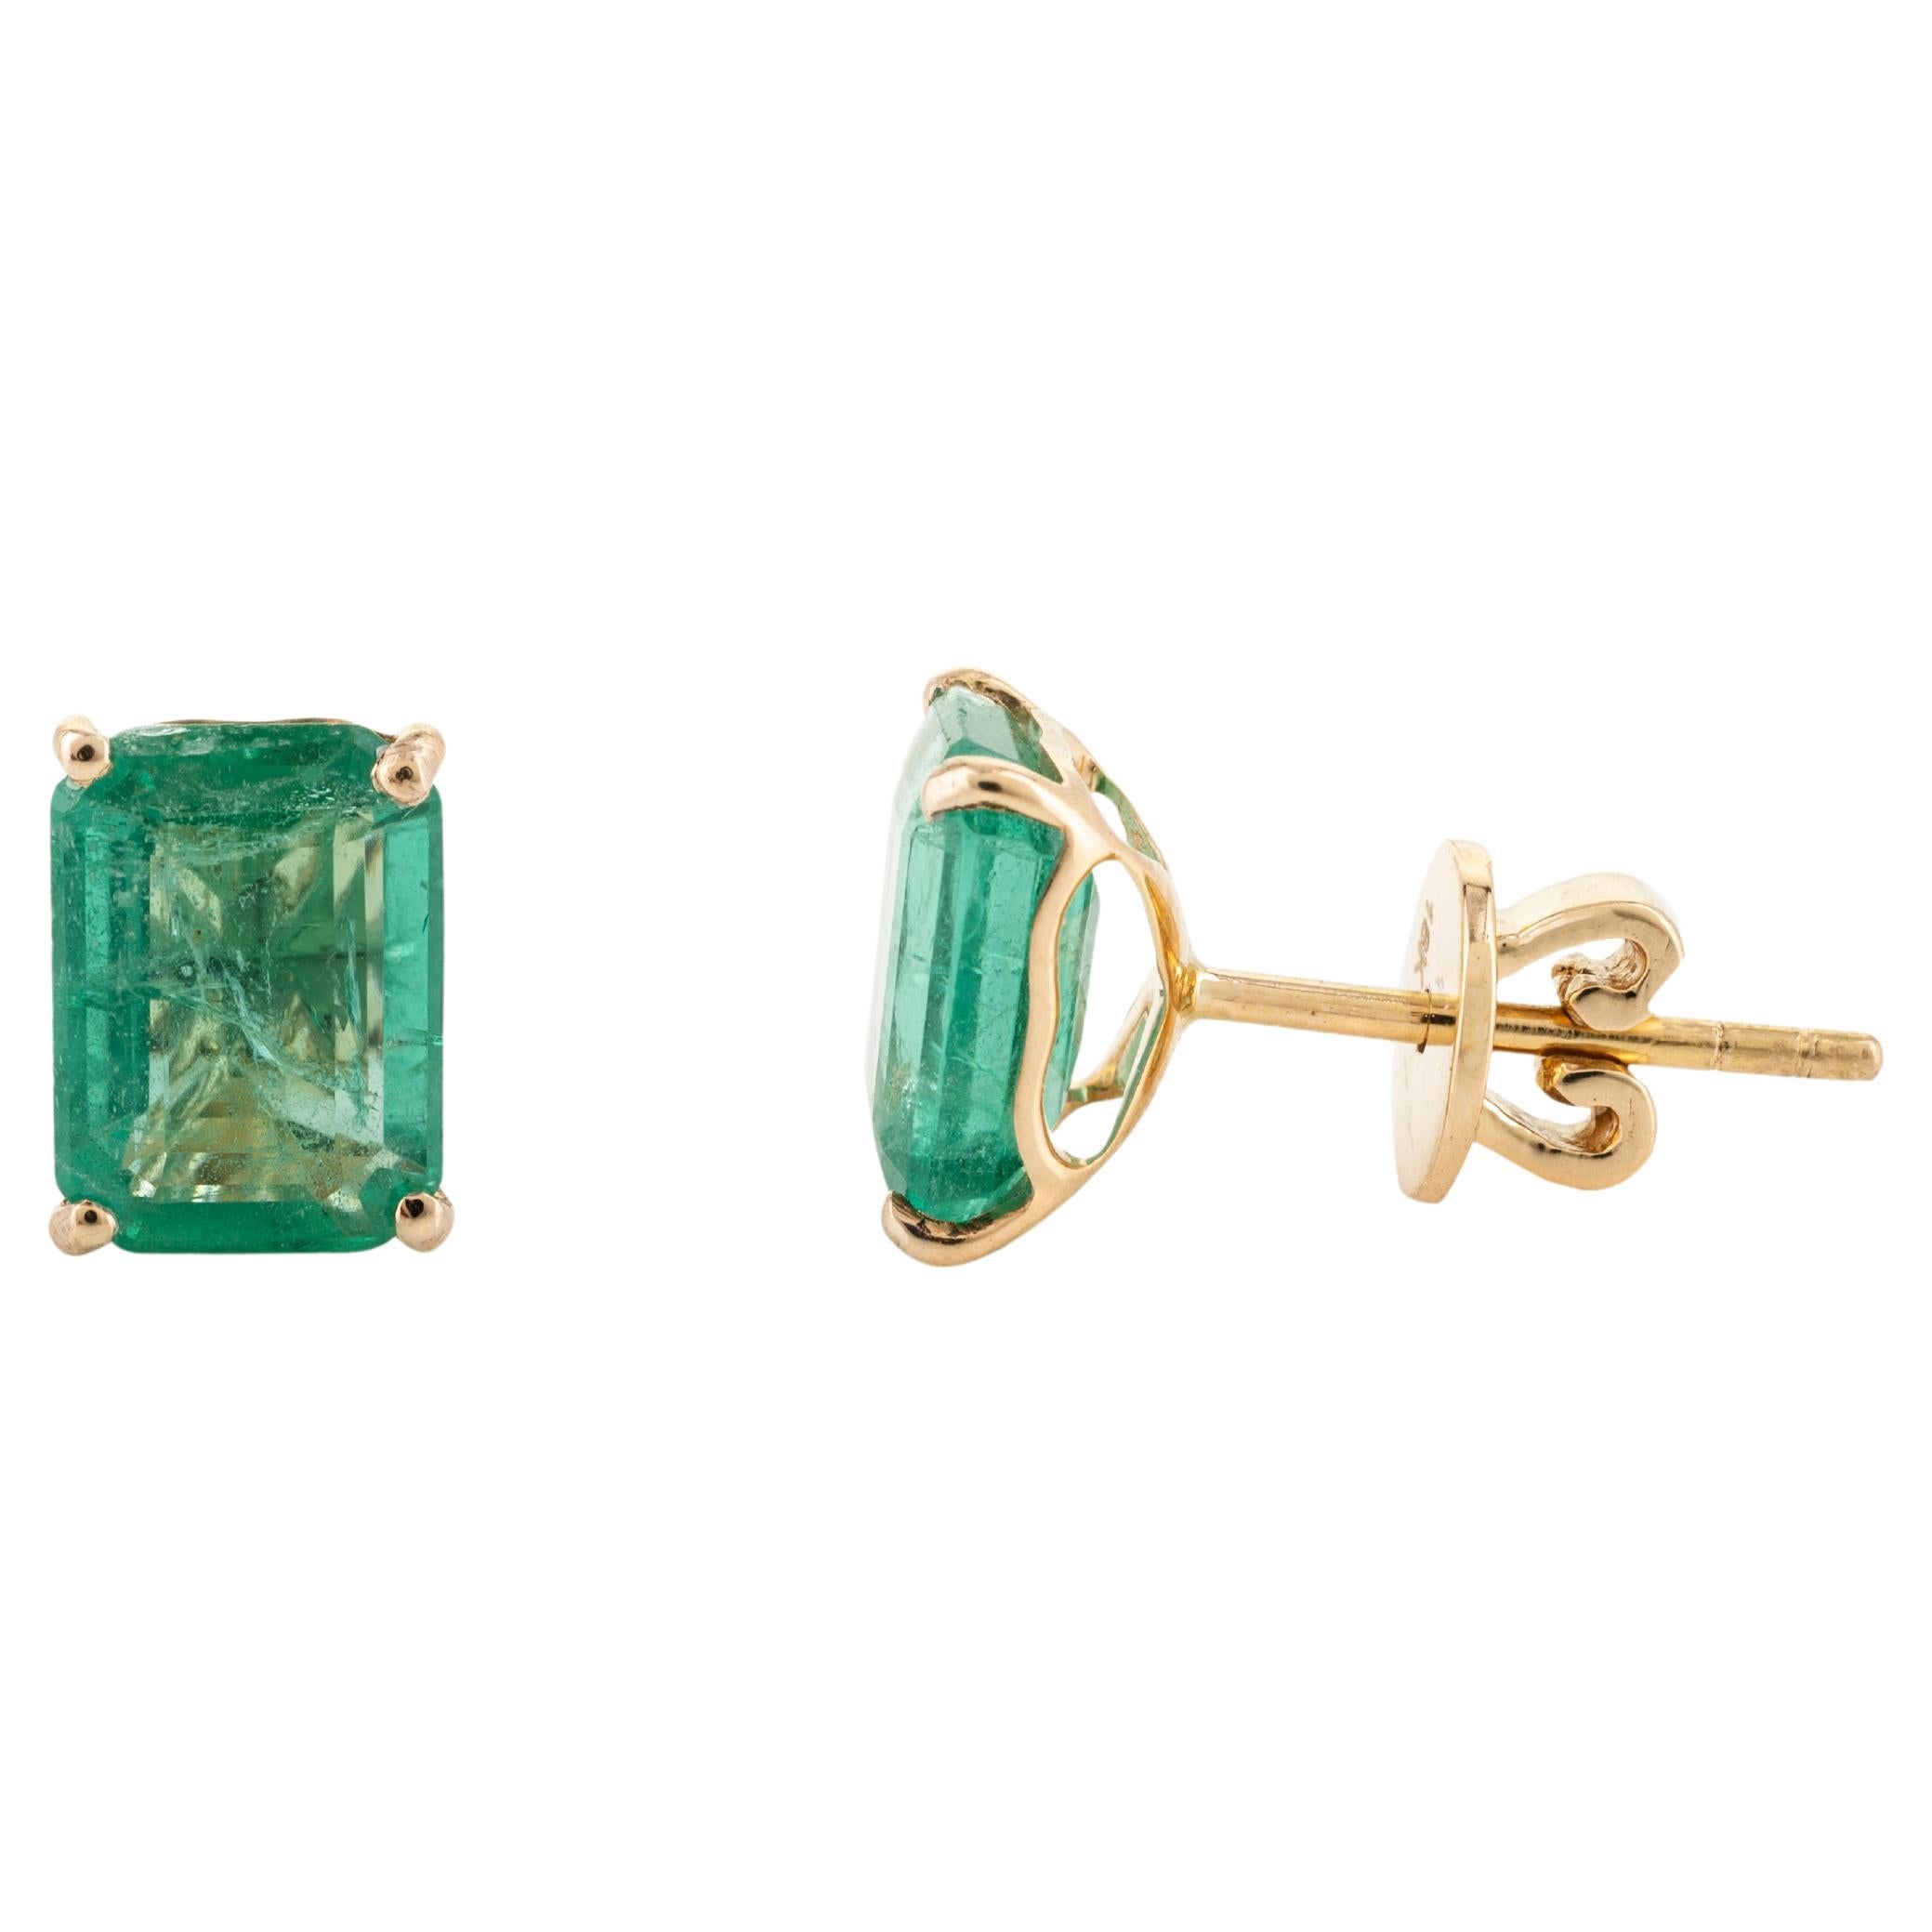 Nature Solitaire Emerald 18k Solid Yellow Gold Stud Earrings Gift for Her